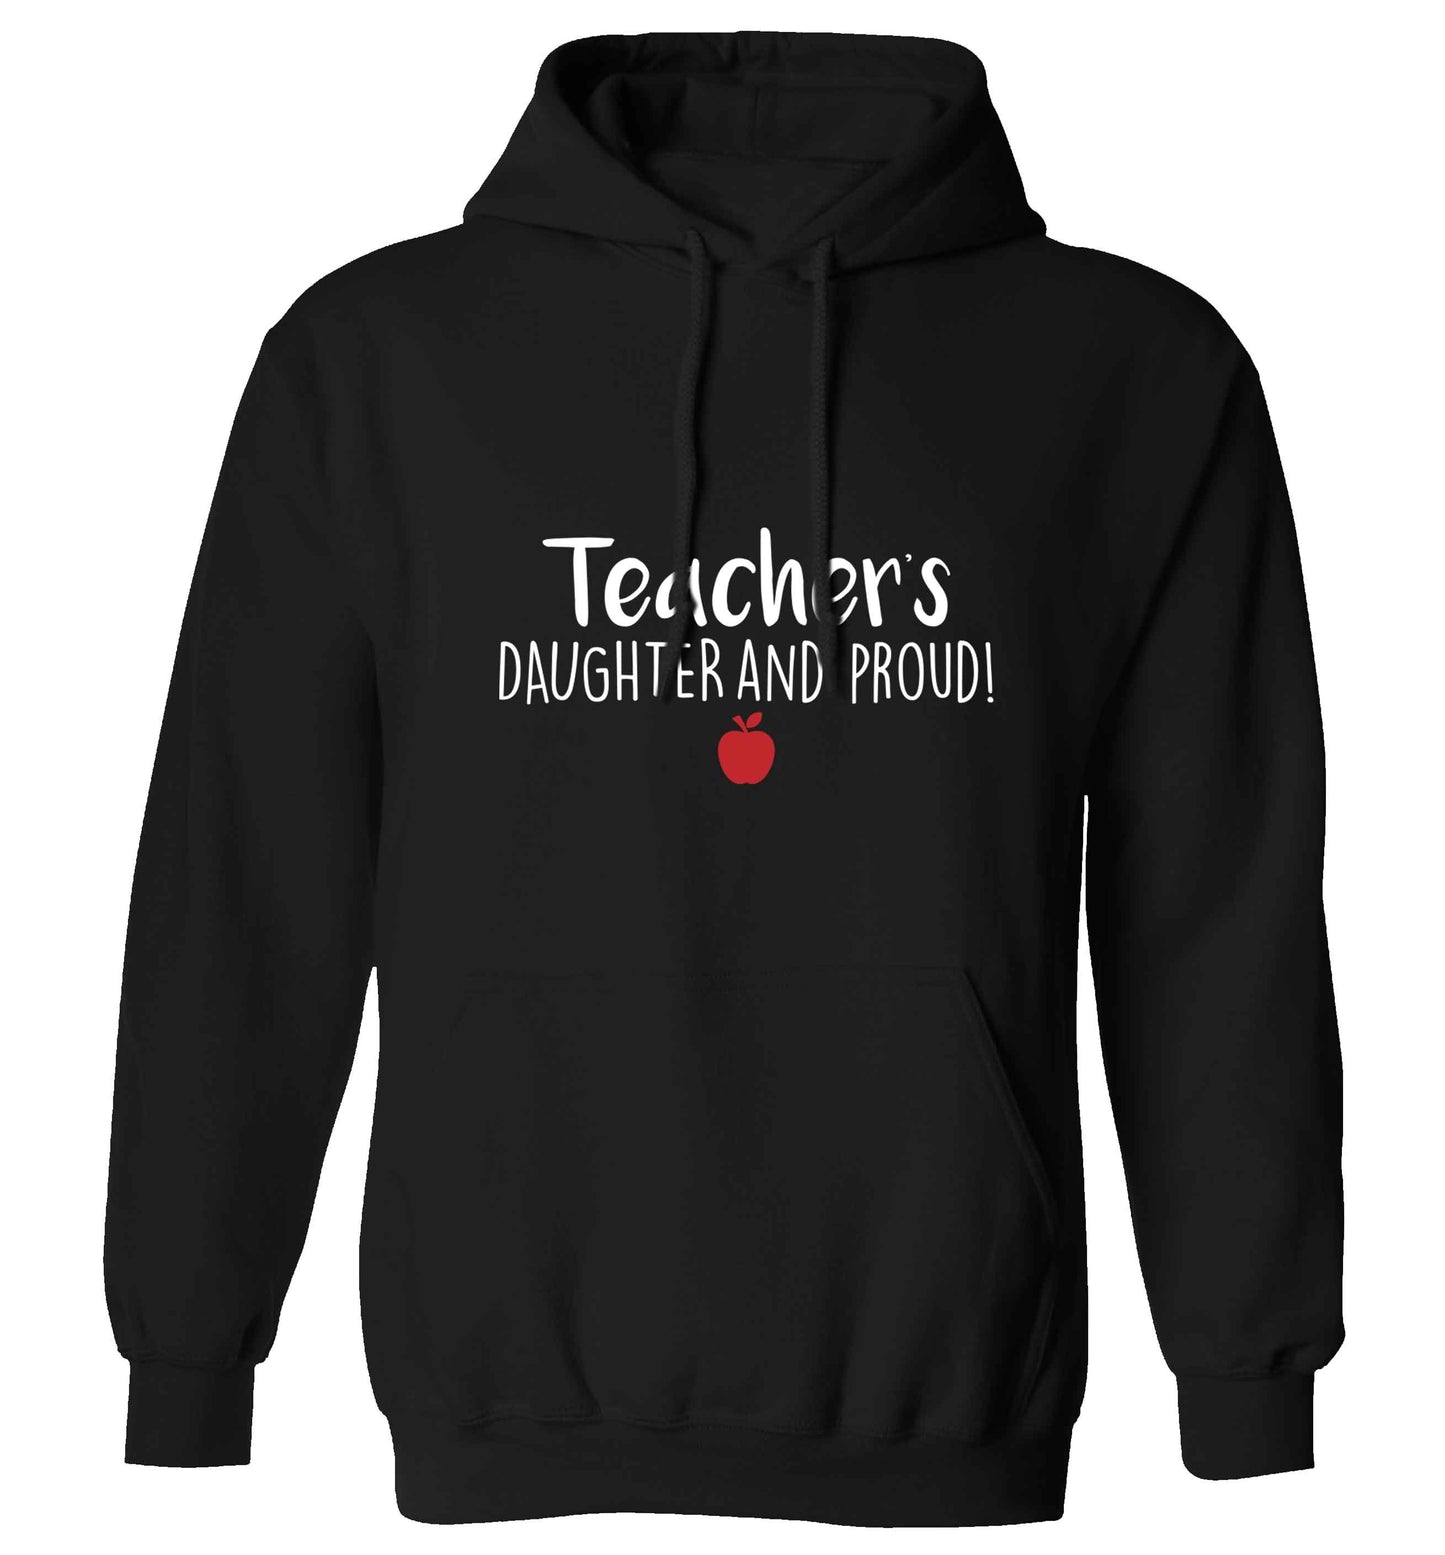 Teachers daughter and proud adults unisex black hoodie 2XL